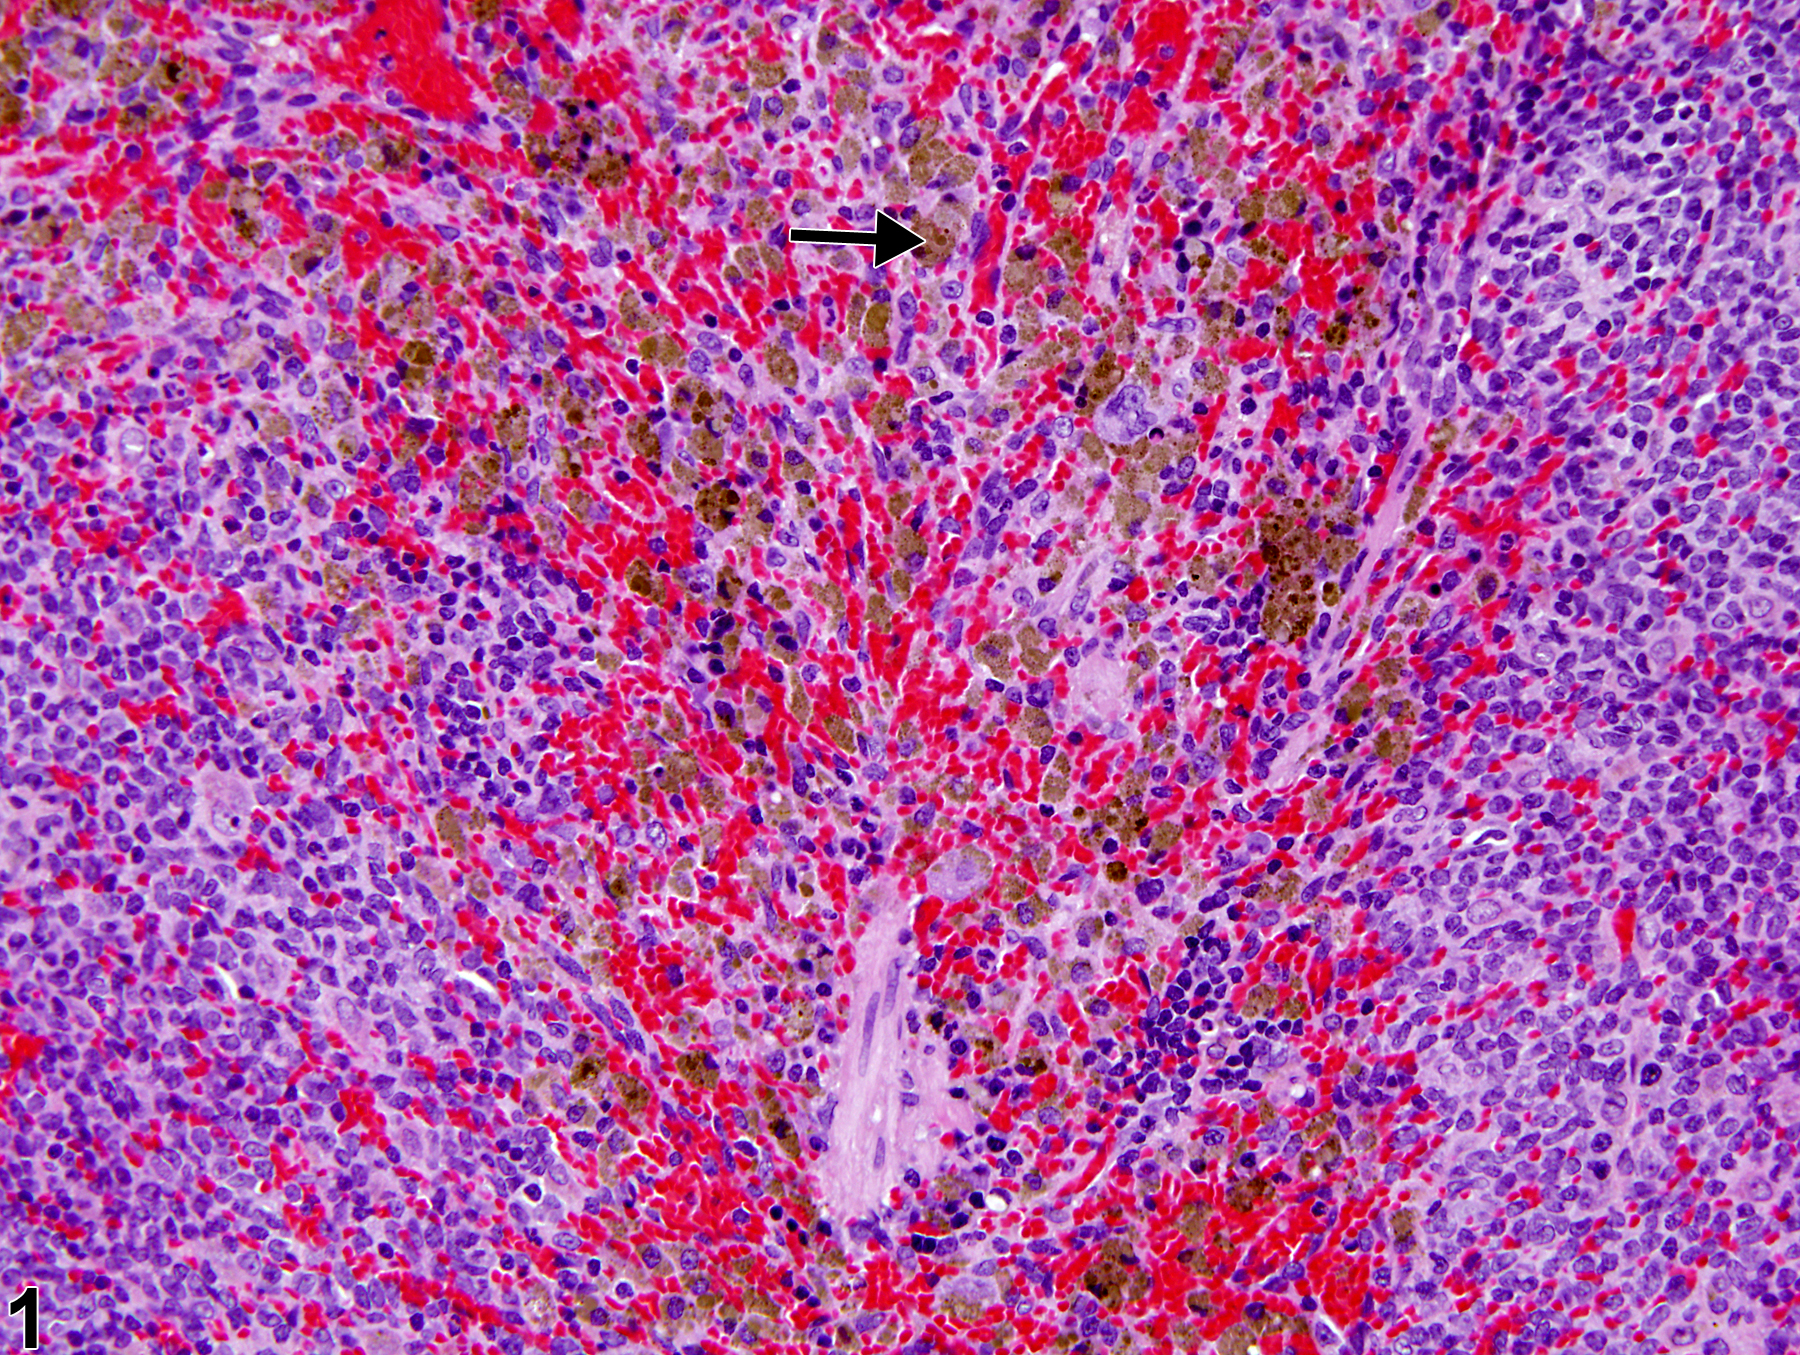 Image of pigment in the spleen from a male F344/N rat in a chronic study